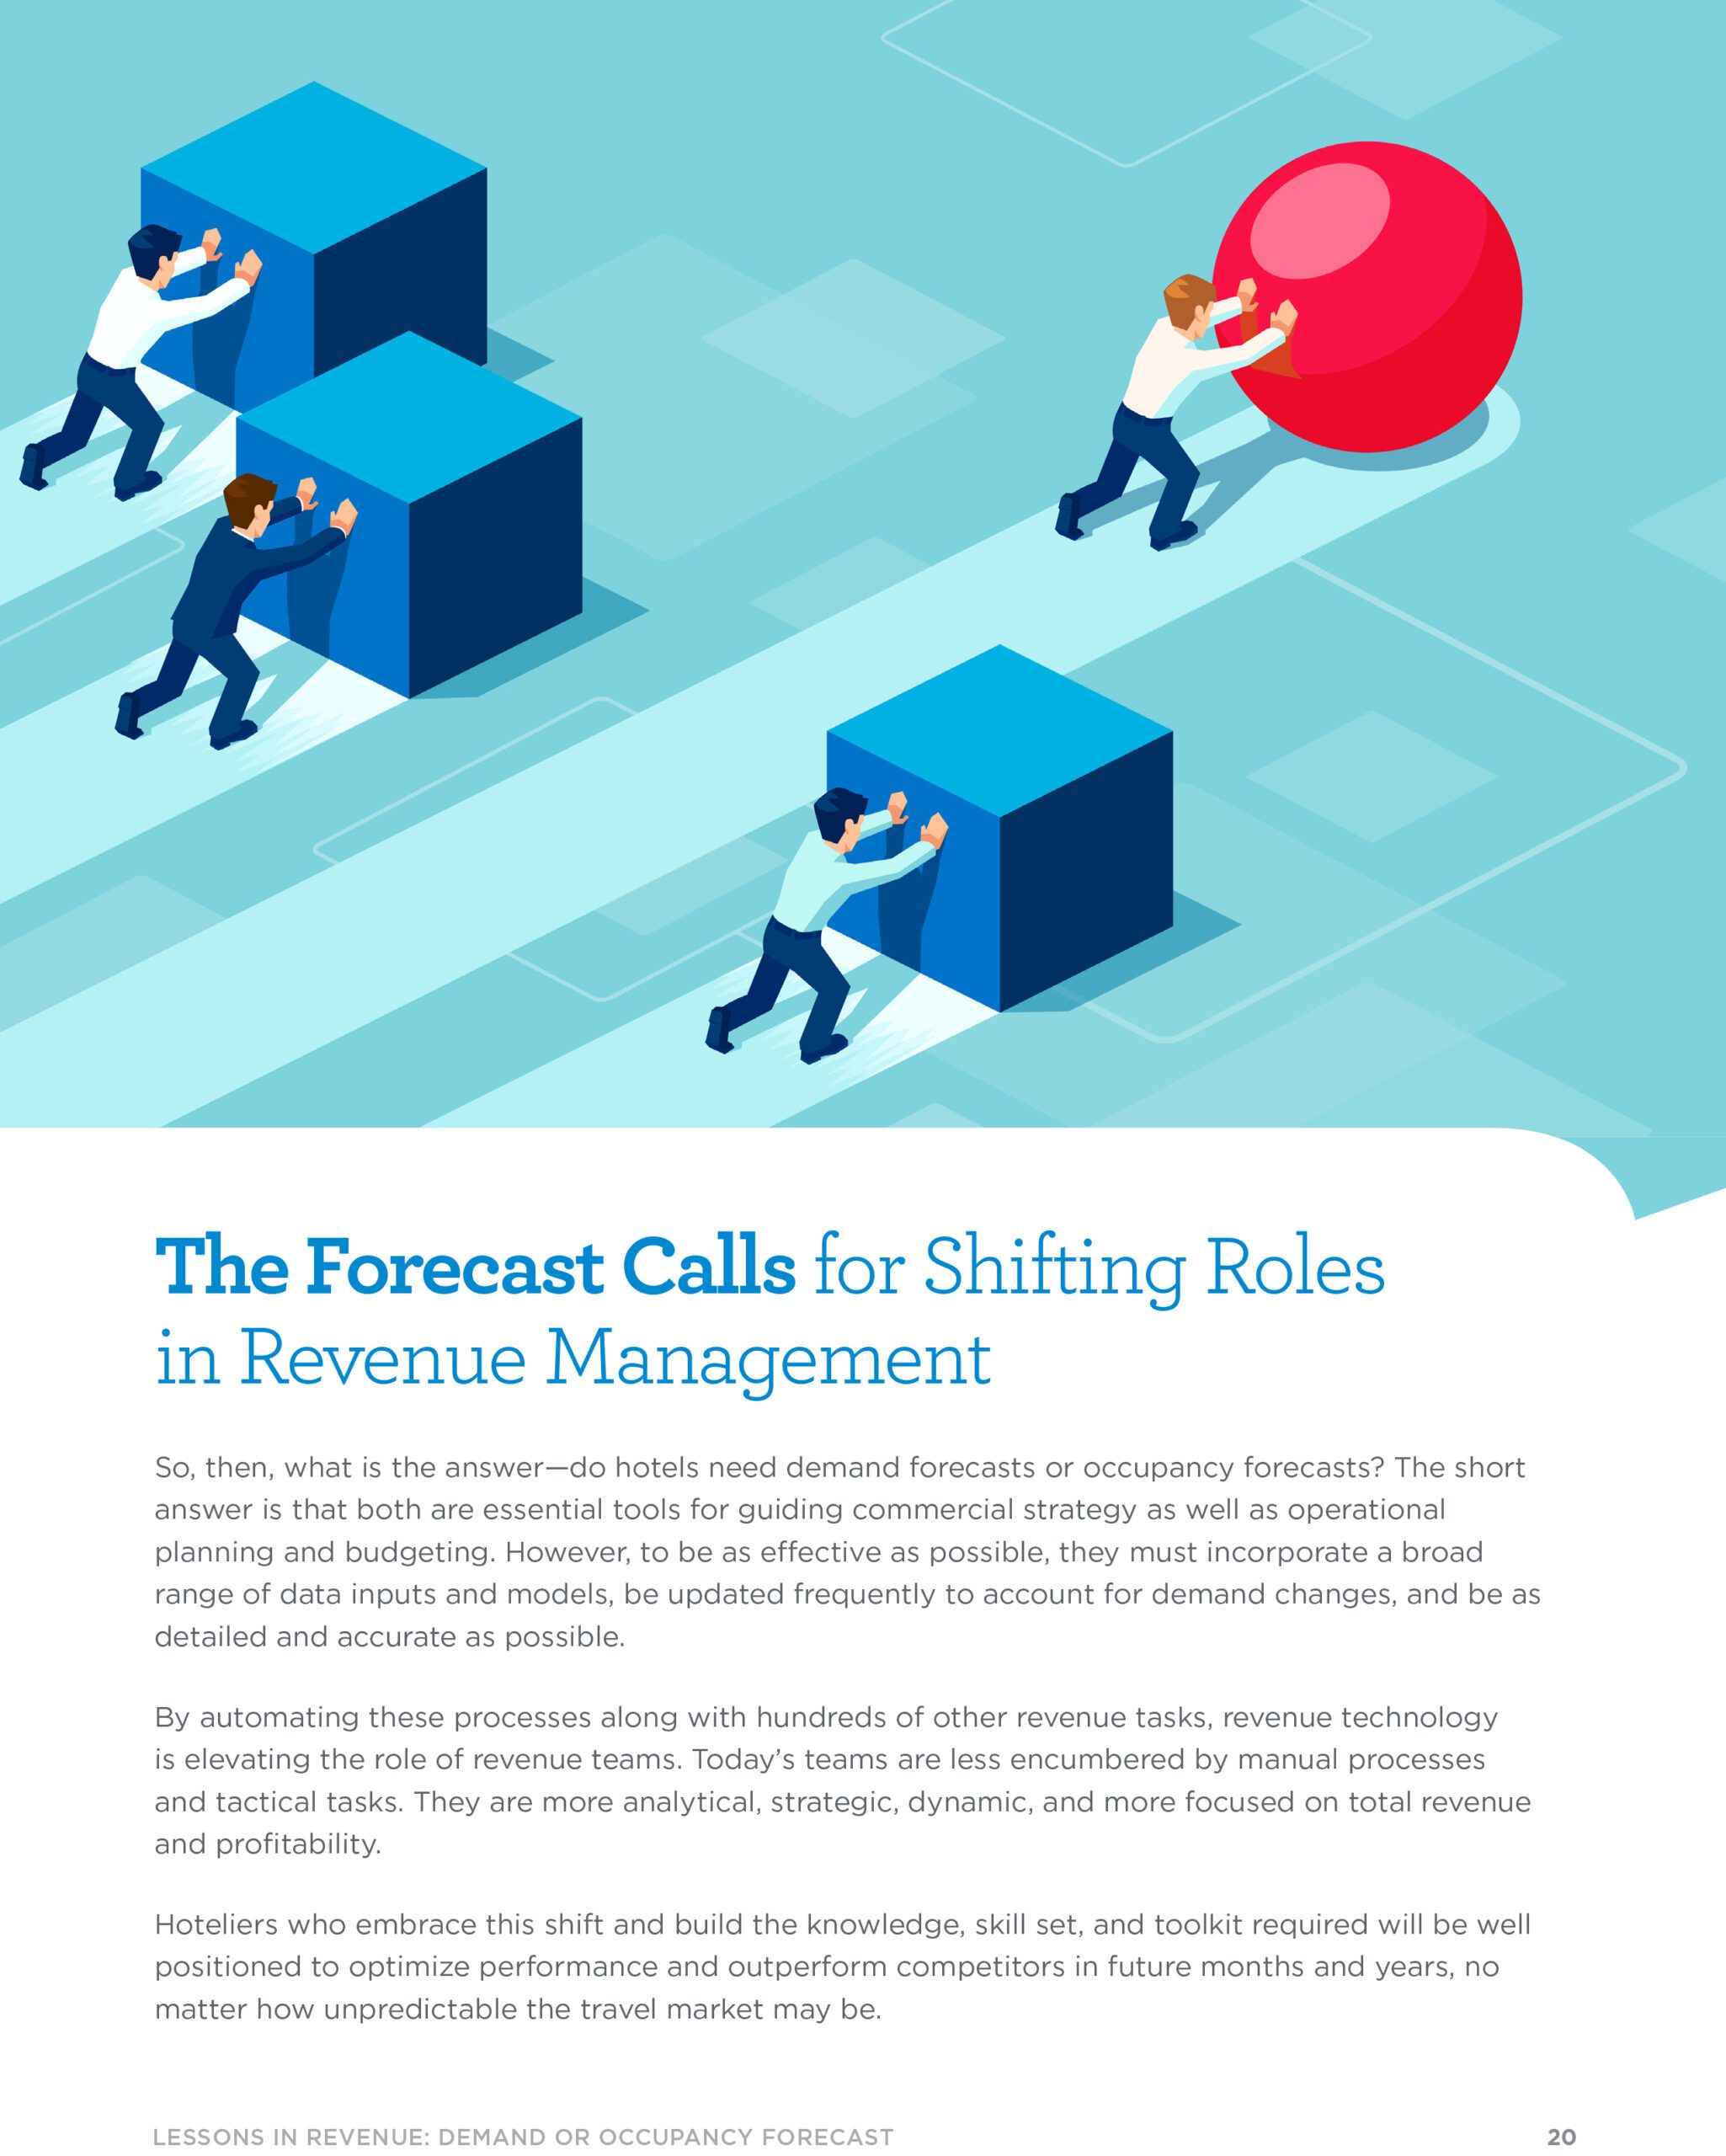 Page 19 - The Forecast Calls for Shifting Roles in Revenue Management